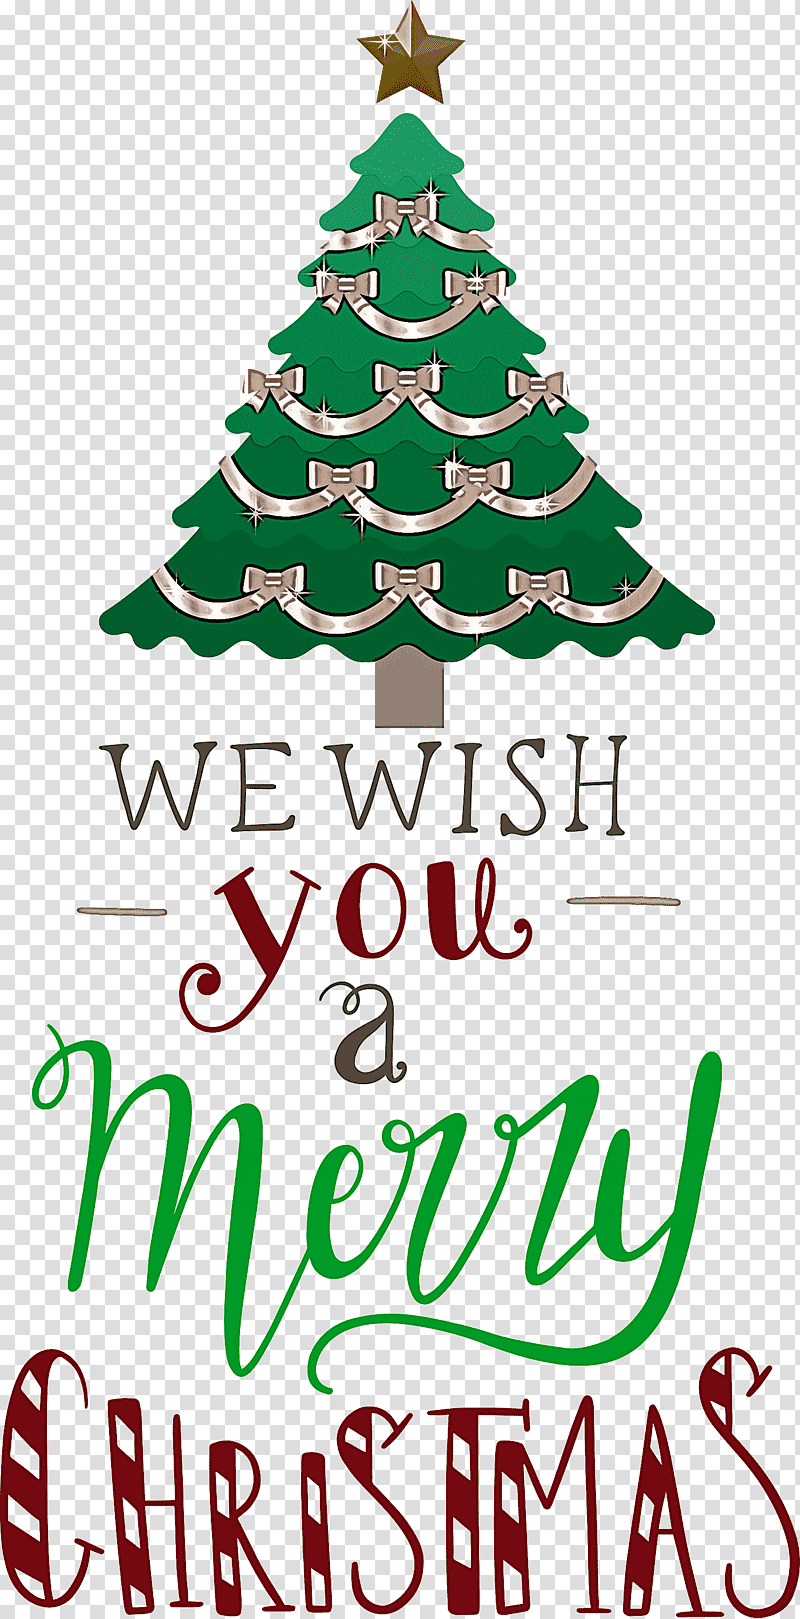 Merry Christmas We Wish You A Merry Christmas, Christmas Tree, Christmas Day, Spruce, Holiday Ornament, Christmas Ornament, Christmas Ornament M transparent background PNG clipart